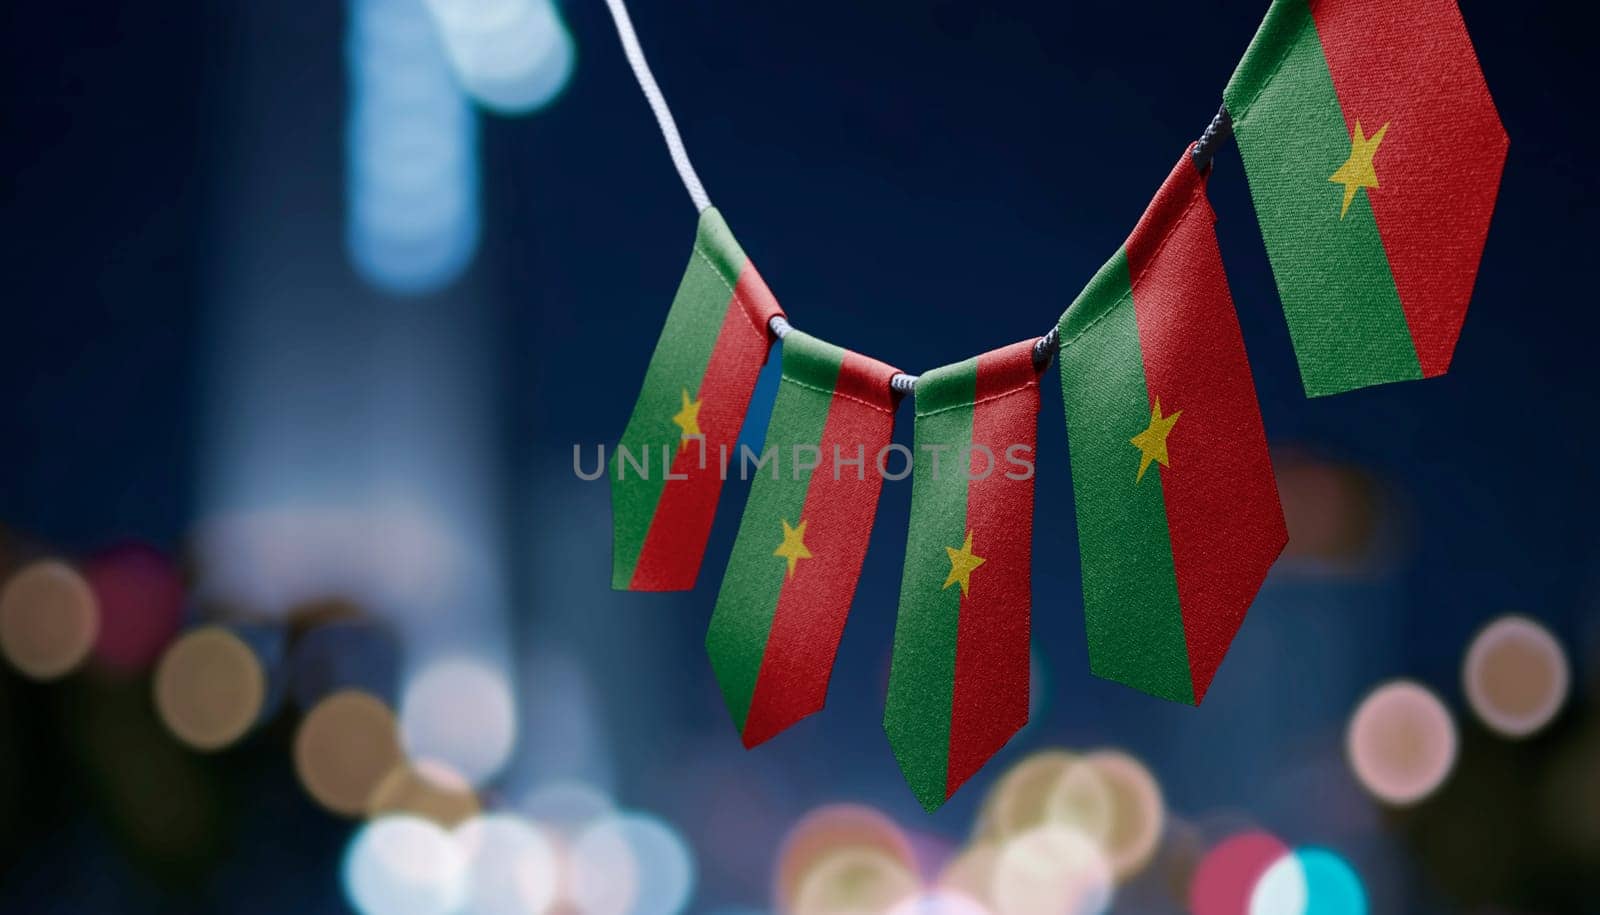 A garland of Burkina Faso national flags on an abstract blurred background by butenkow